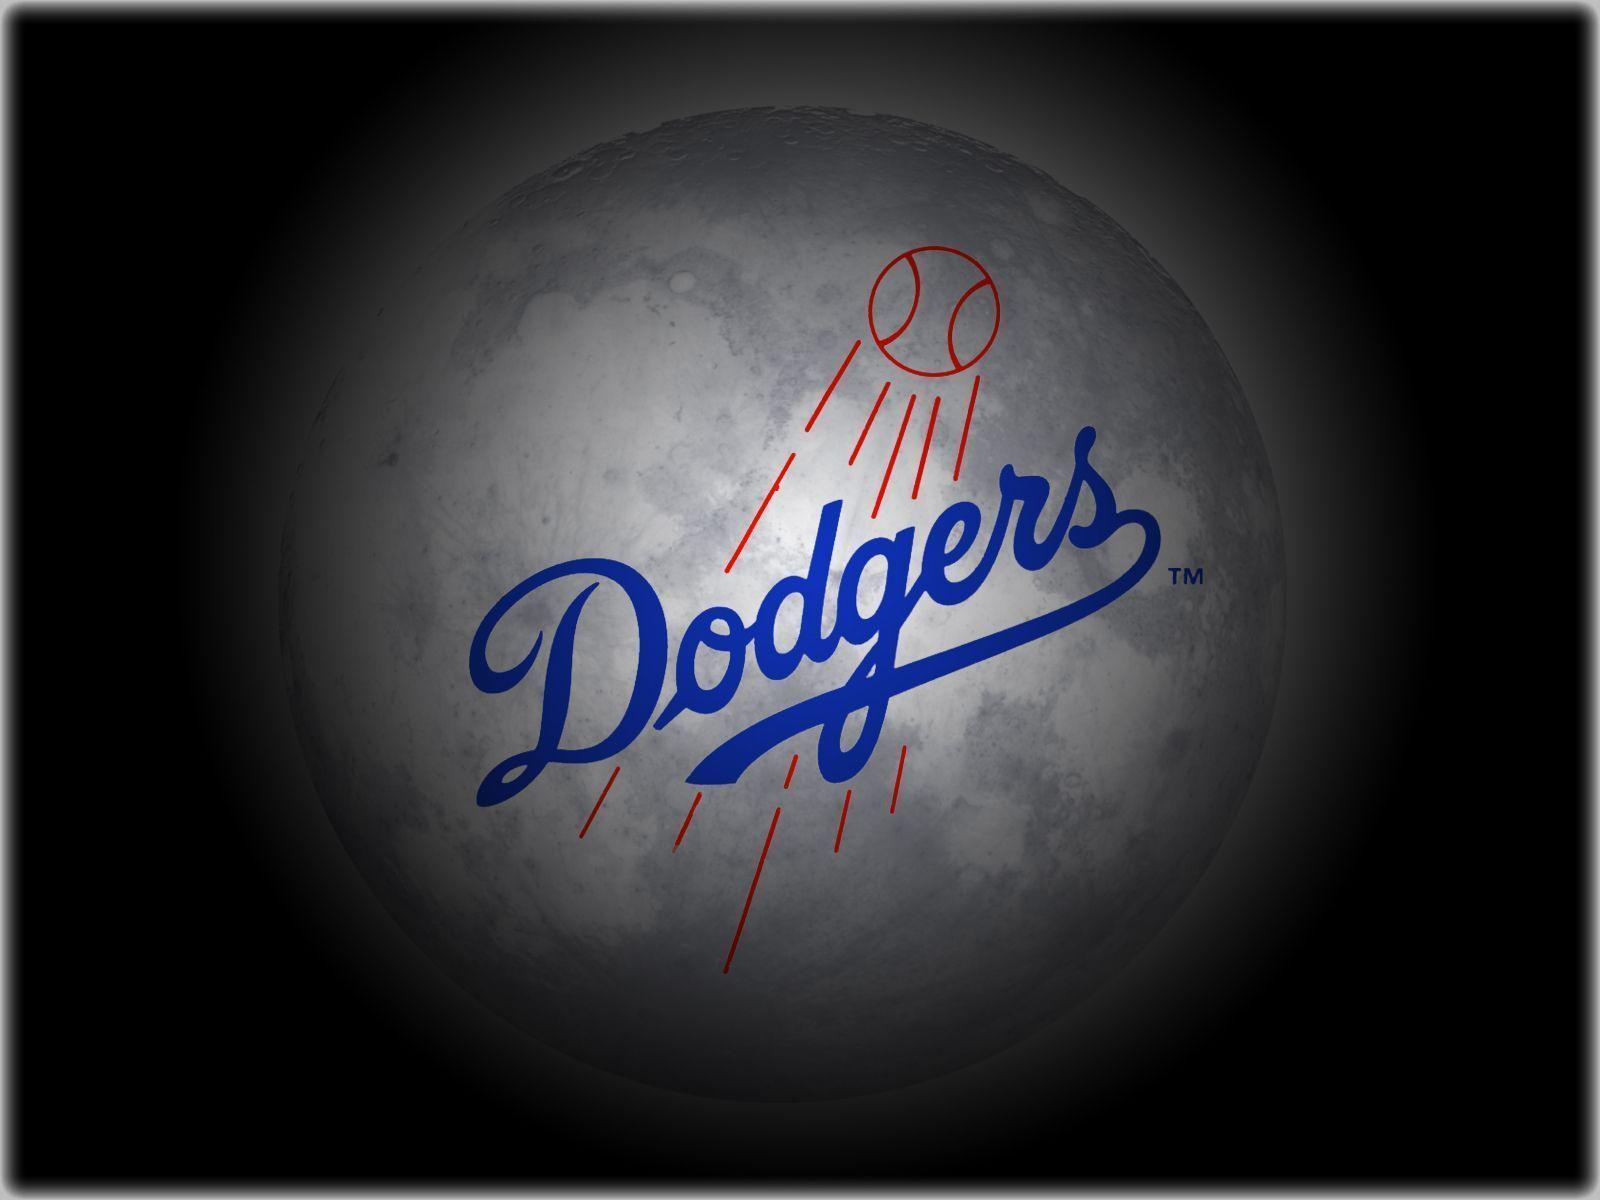 Gallery for dodgers wallpaper free